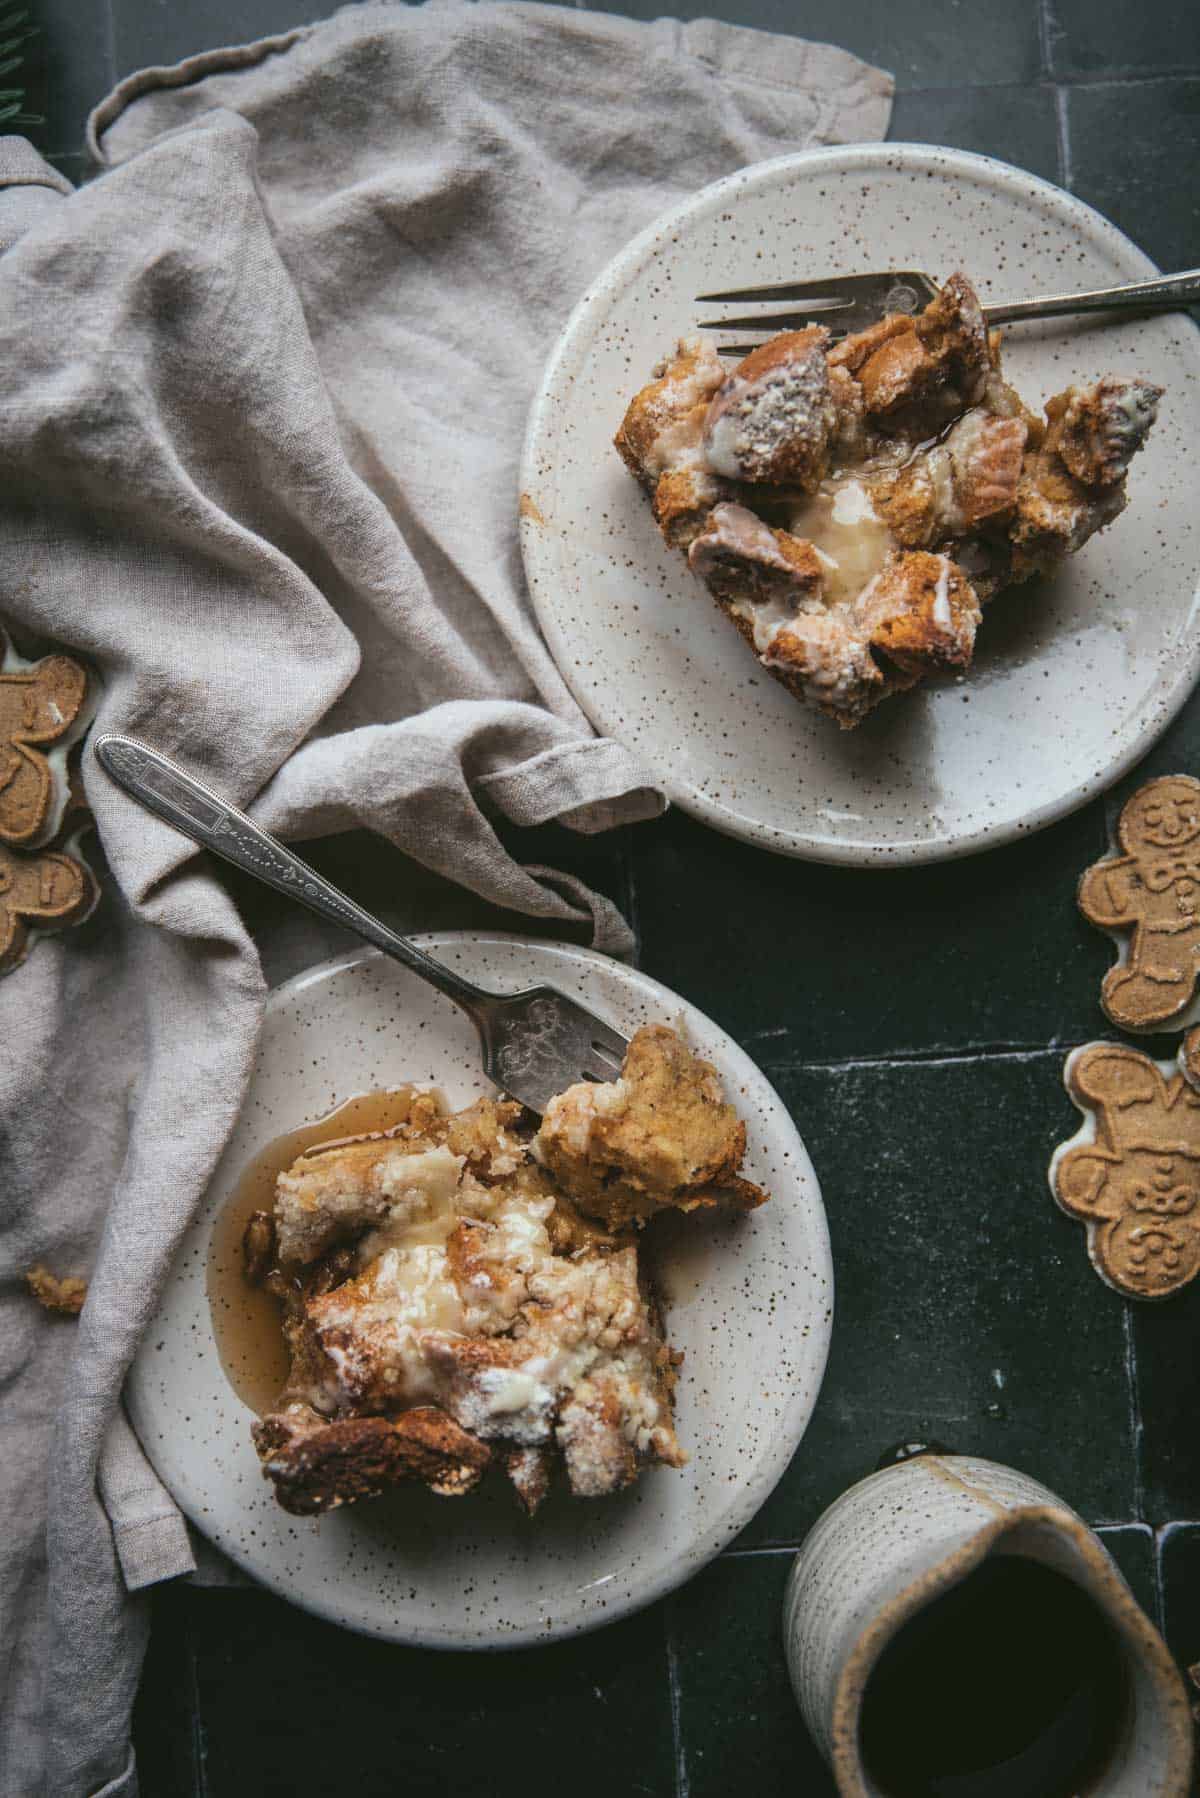 Overhead image of two white speckle ceramic plates each holding a piece of gingerbread french toast casserole drizzled with maple syrup.  Plates are on a green tile surface with linen napkins, gingerbread cookies, and a ceramic pourer next to the bottom plate.